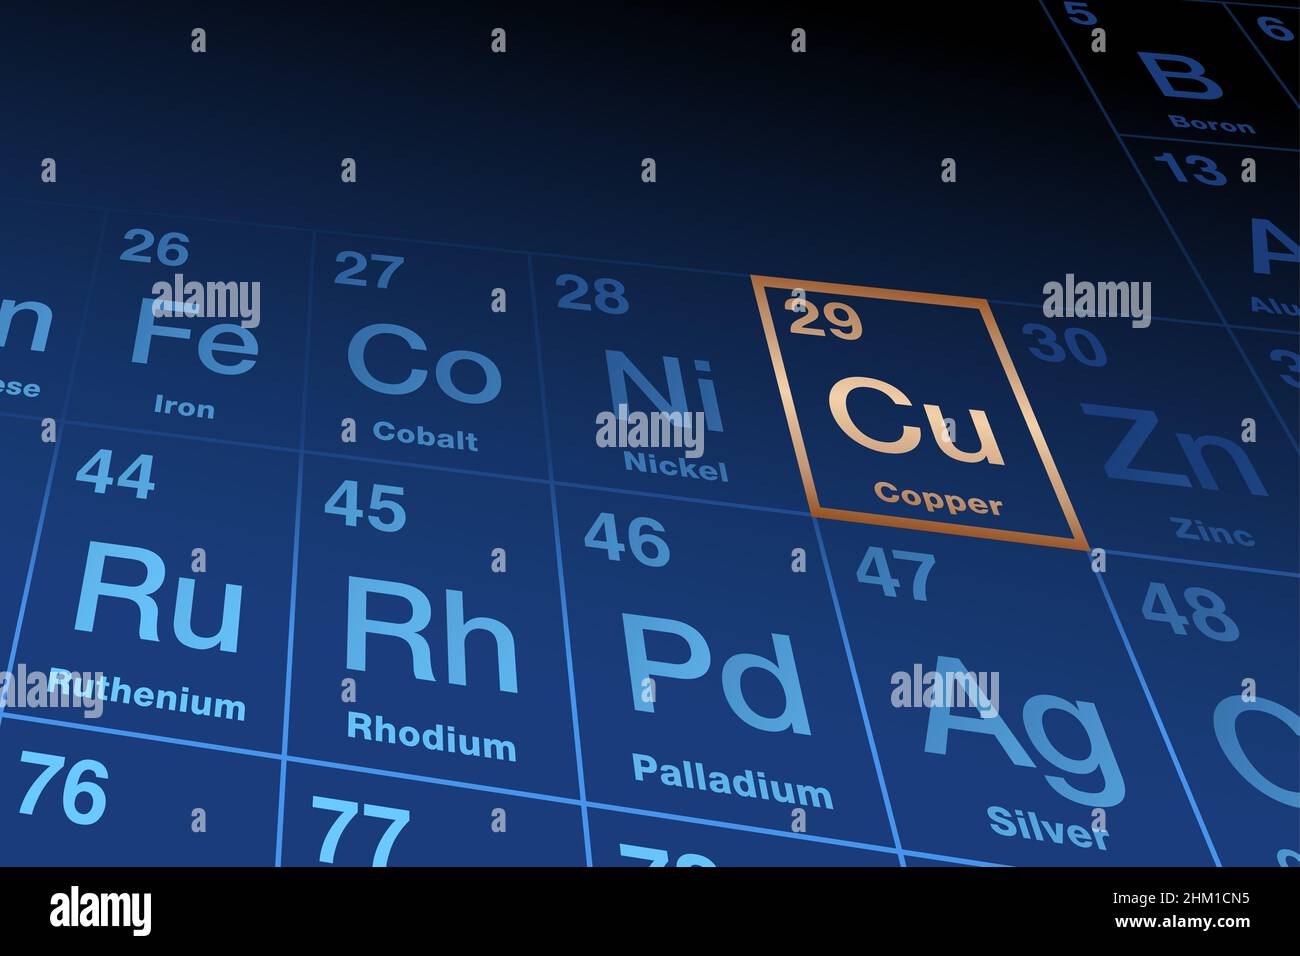 Element copper on periodic table of elements, with element symbol Cu from Latin cuprum, and atomic number 29. Transition metal. Stock Photo